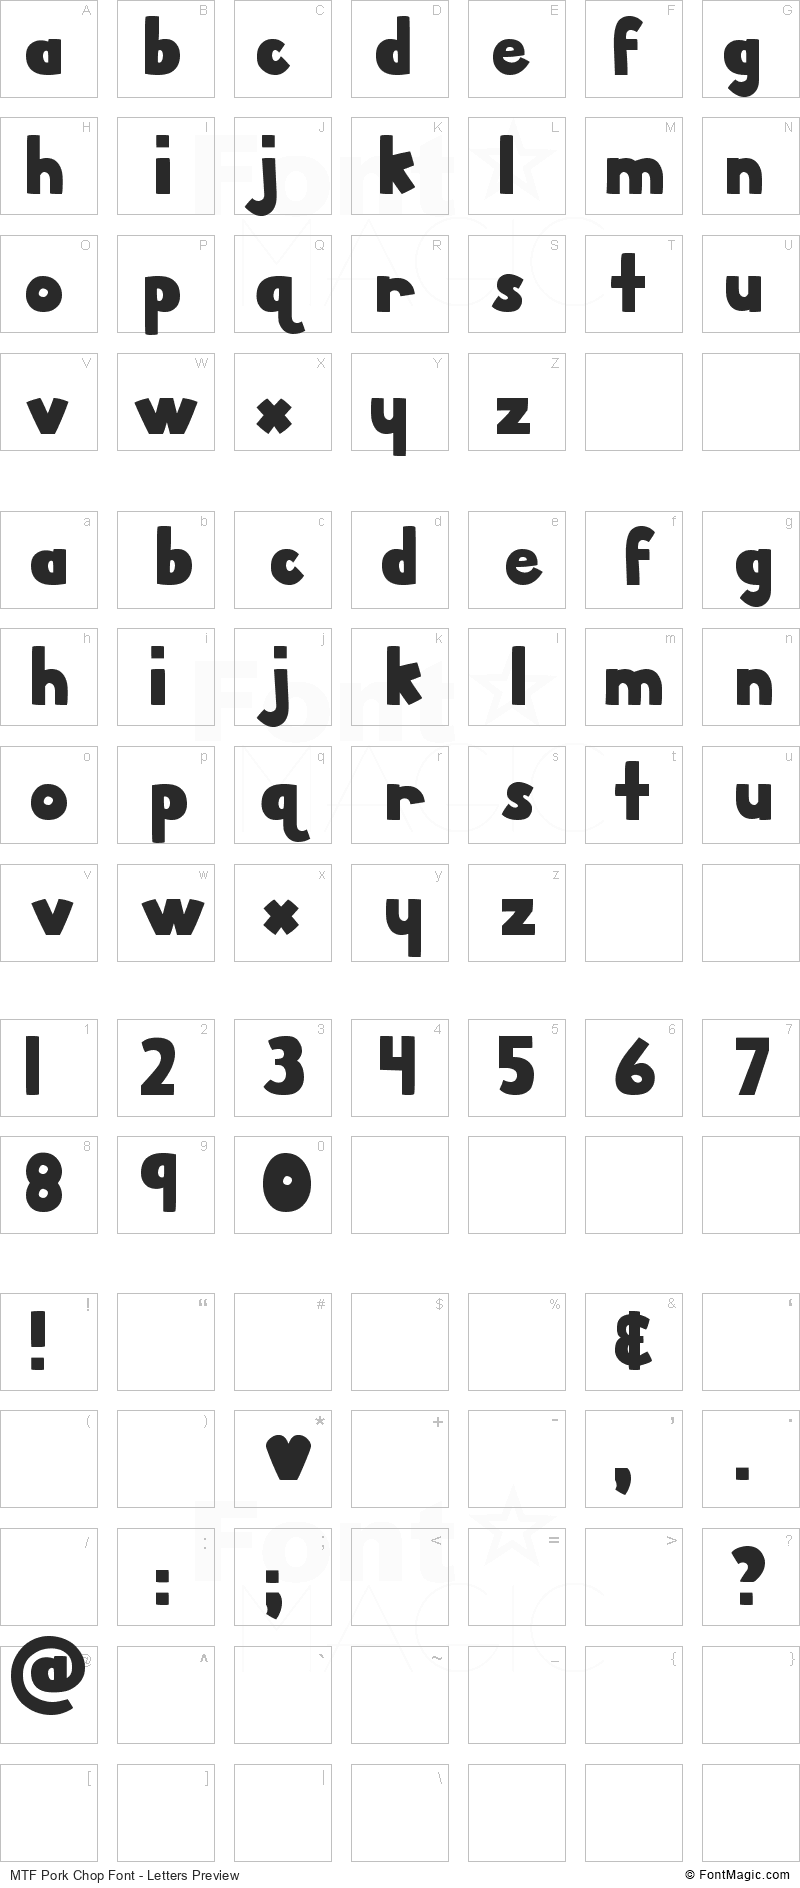 MTF Pork Chop Font - All Latters Preview Chart